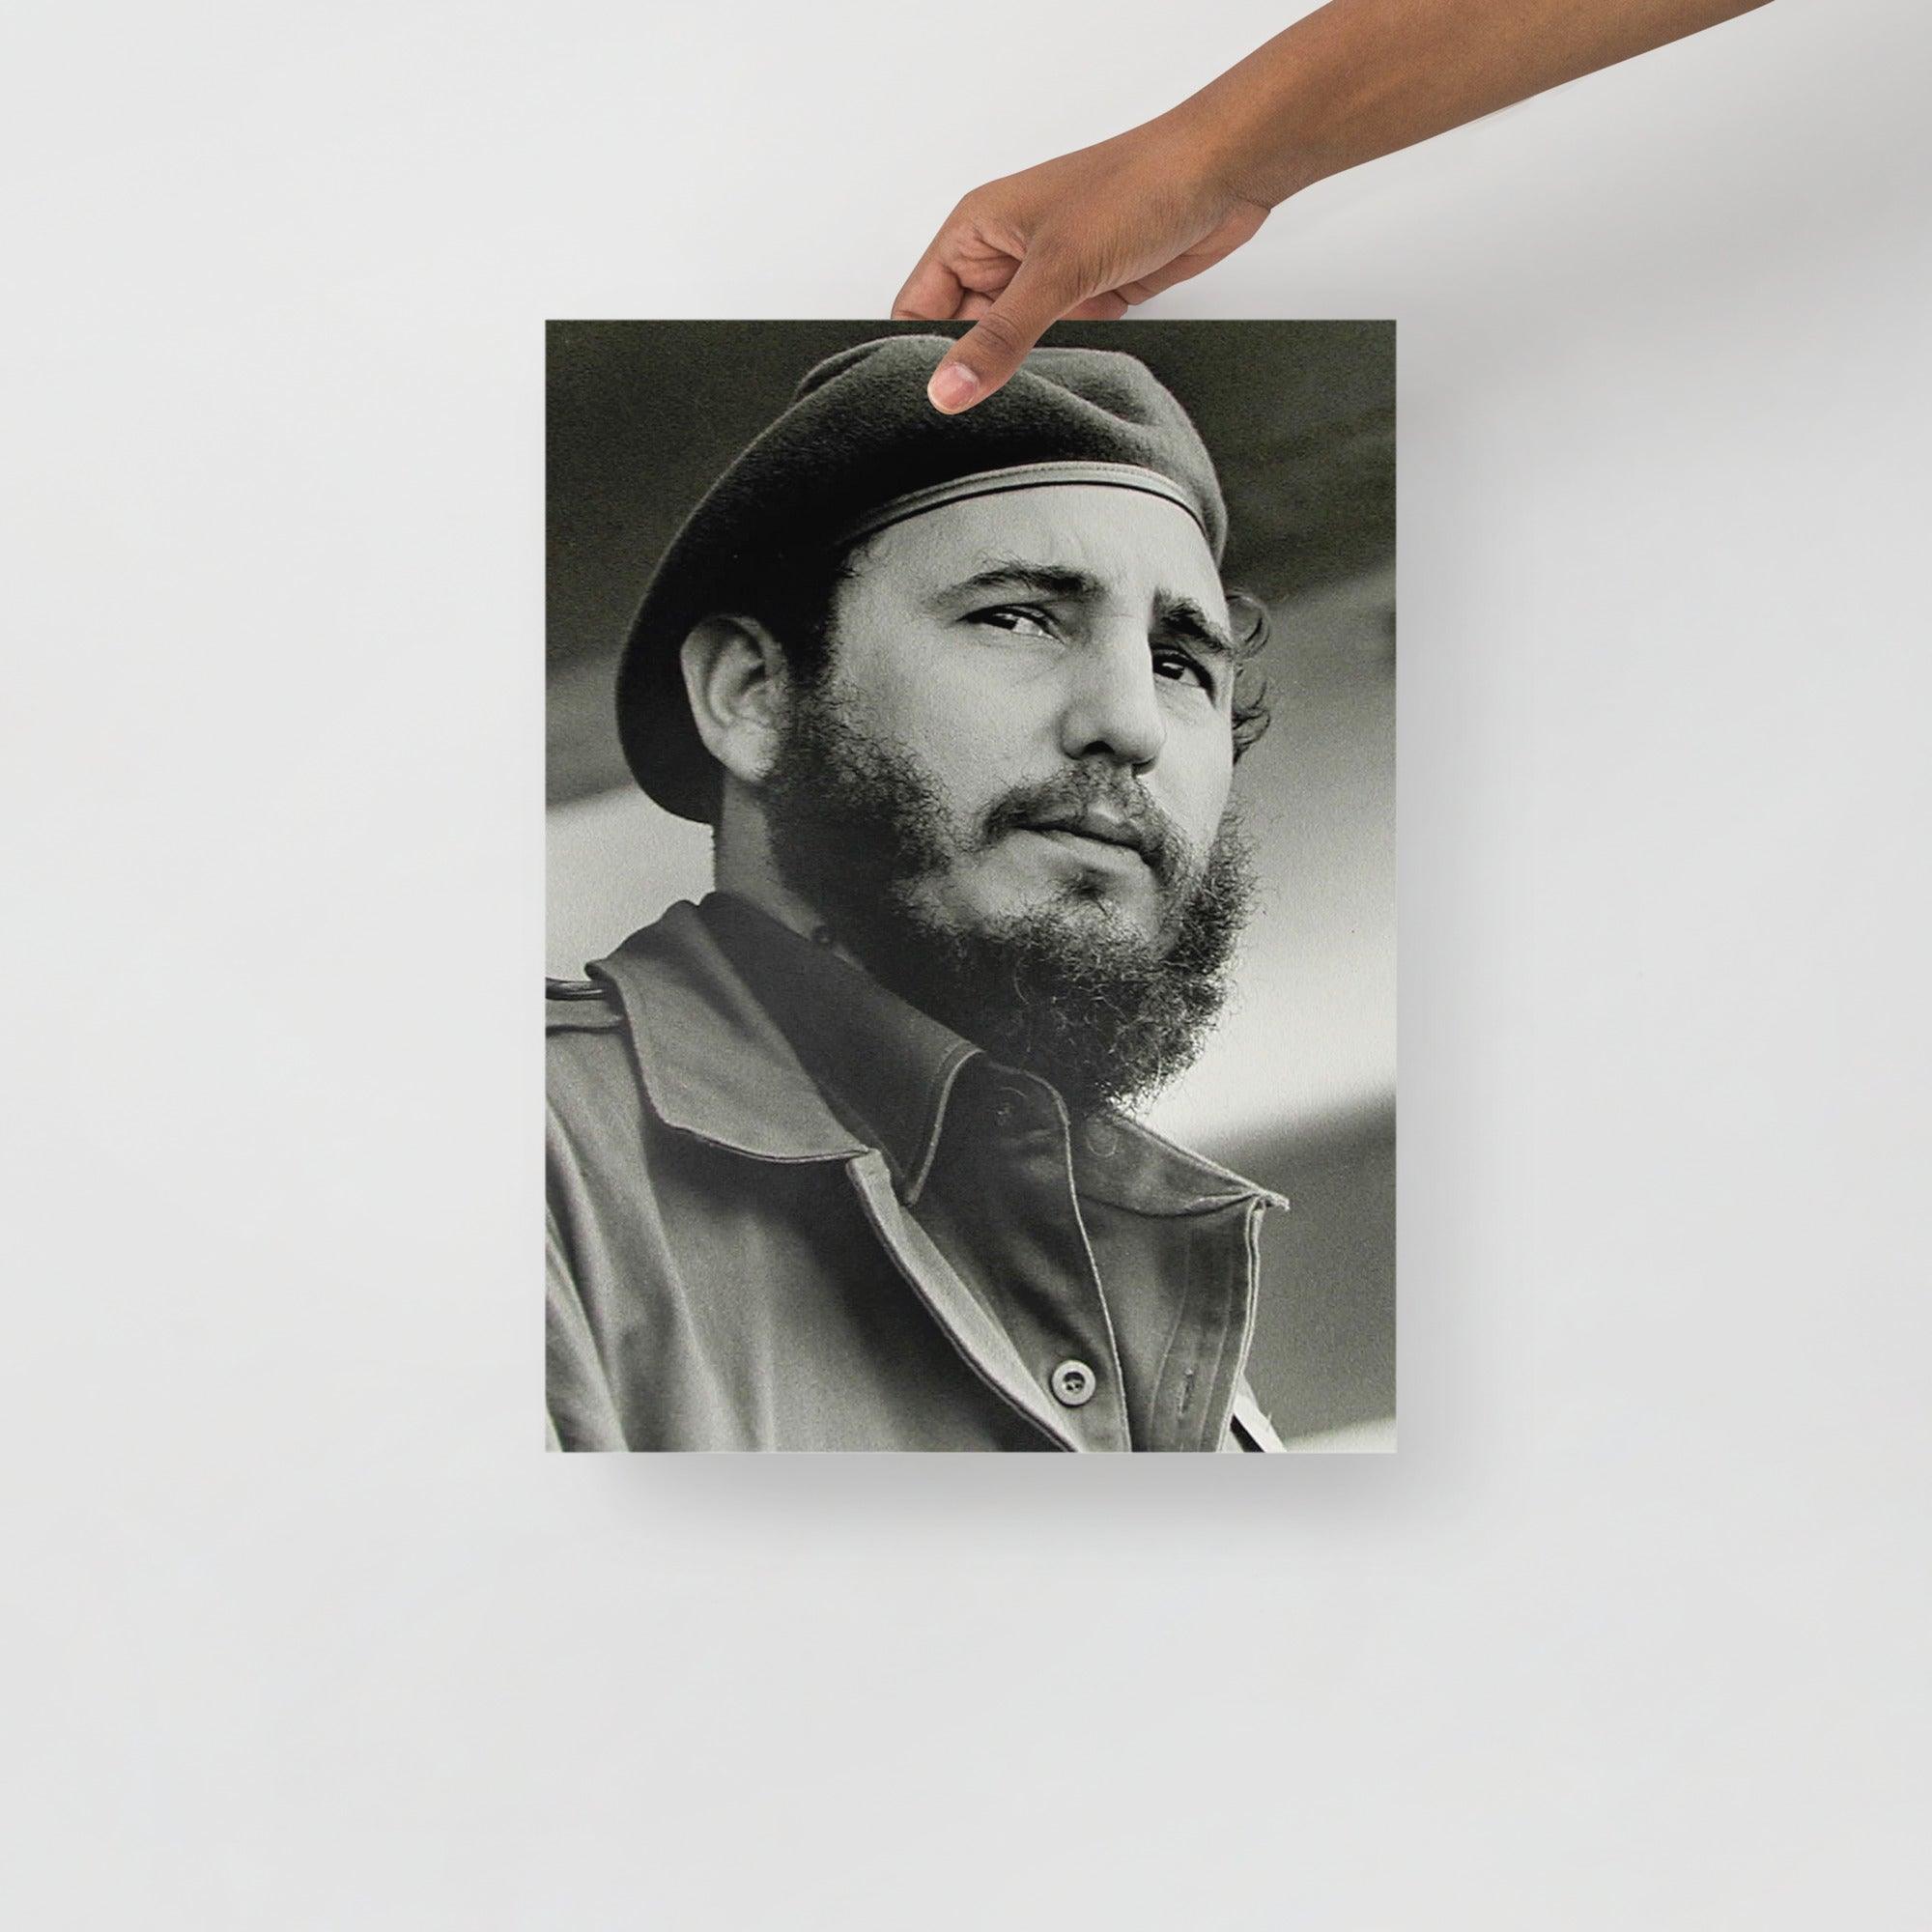 A Fidel Castro poster on a plain backdrop in size 12x16”.